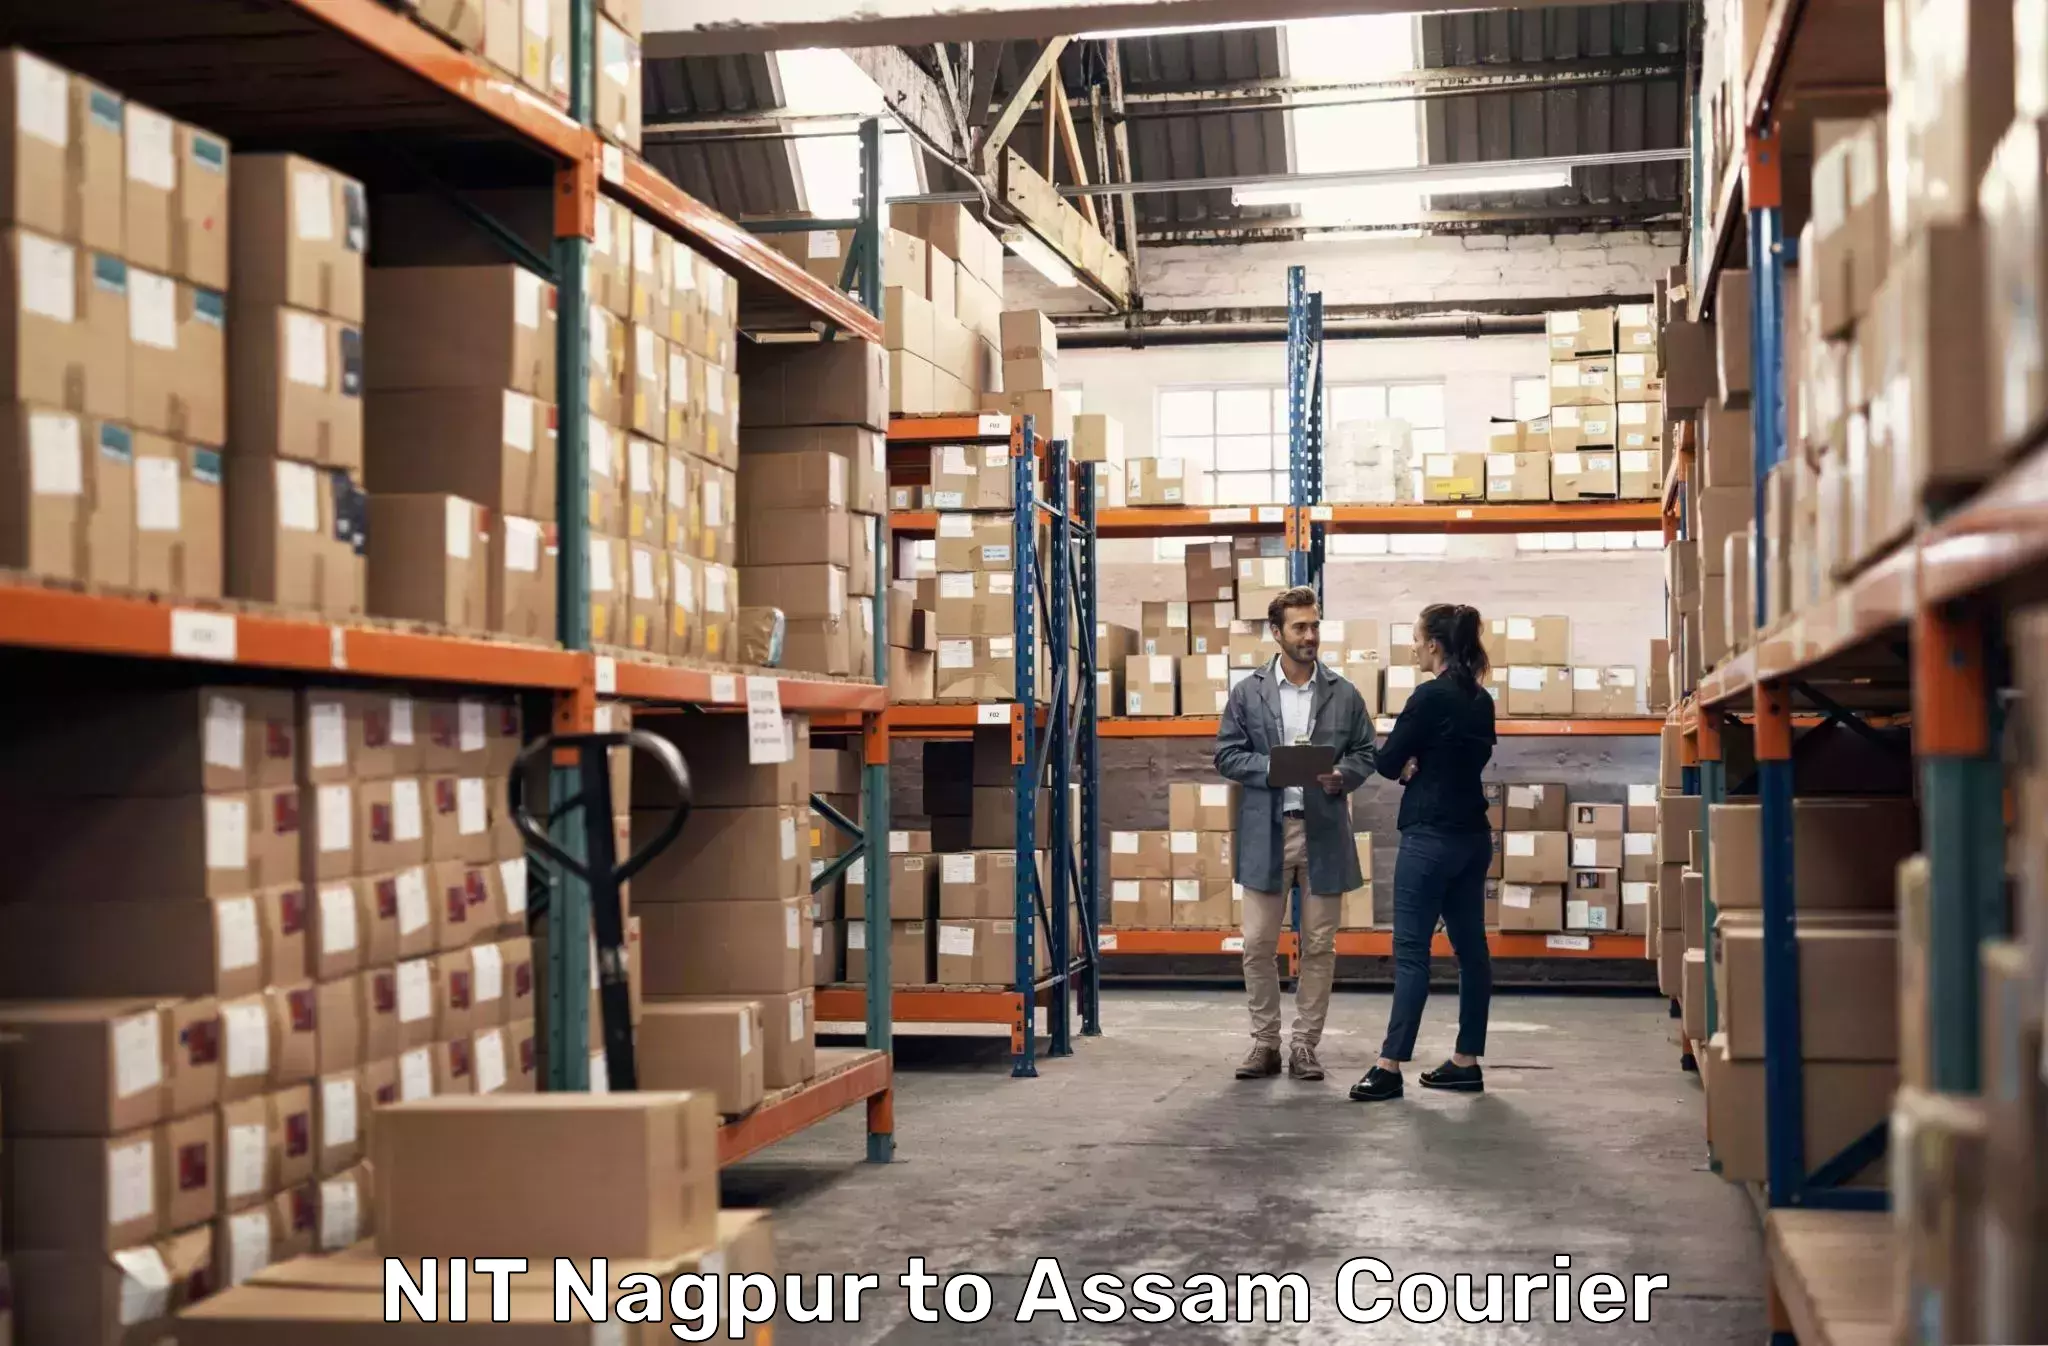 Subscription-based courier NIT Nagpur to Assam